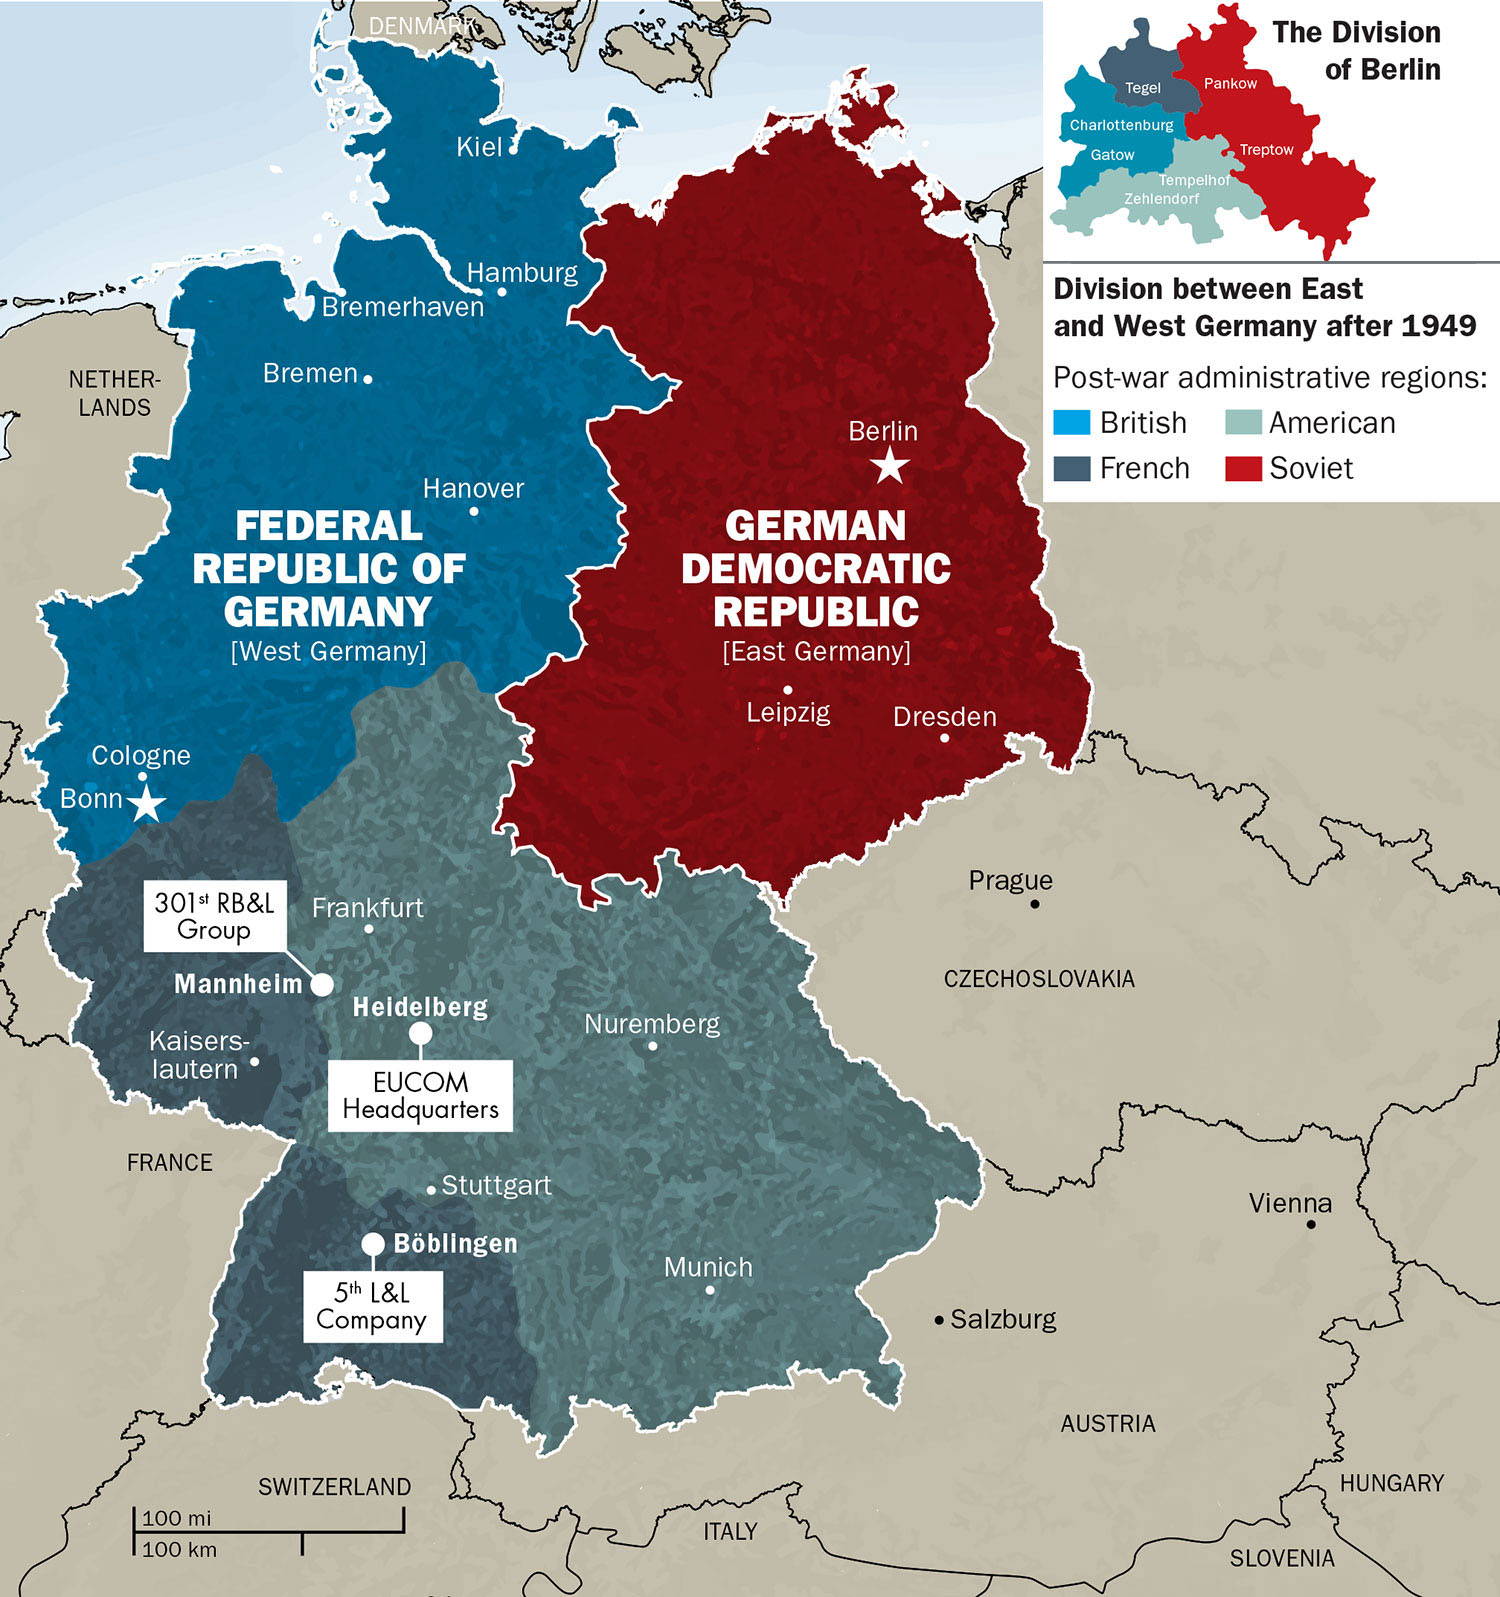 Berlin Blockade, Division of Germany, Airlift, NATO and the Two Germanys